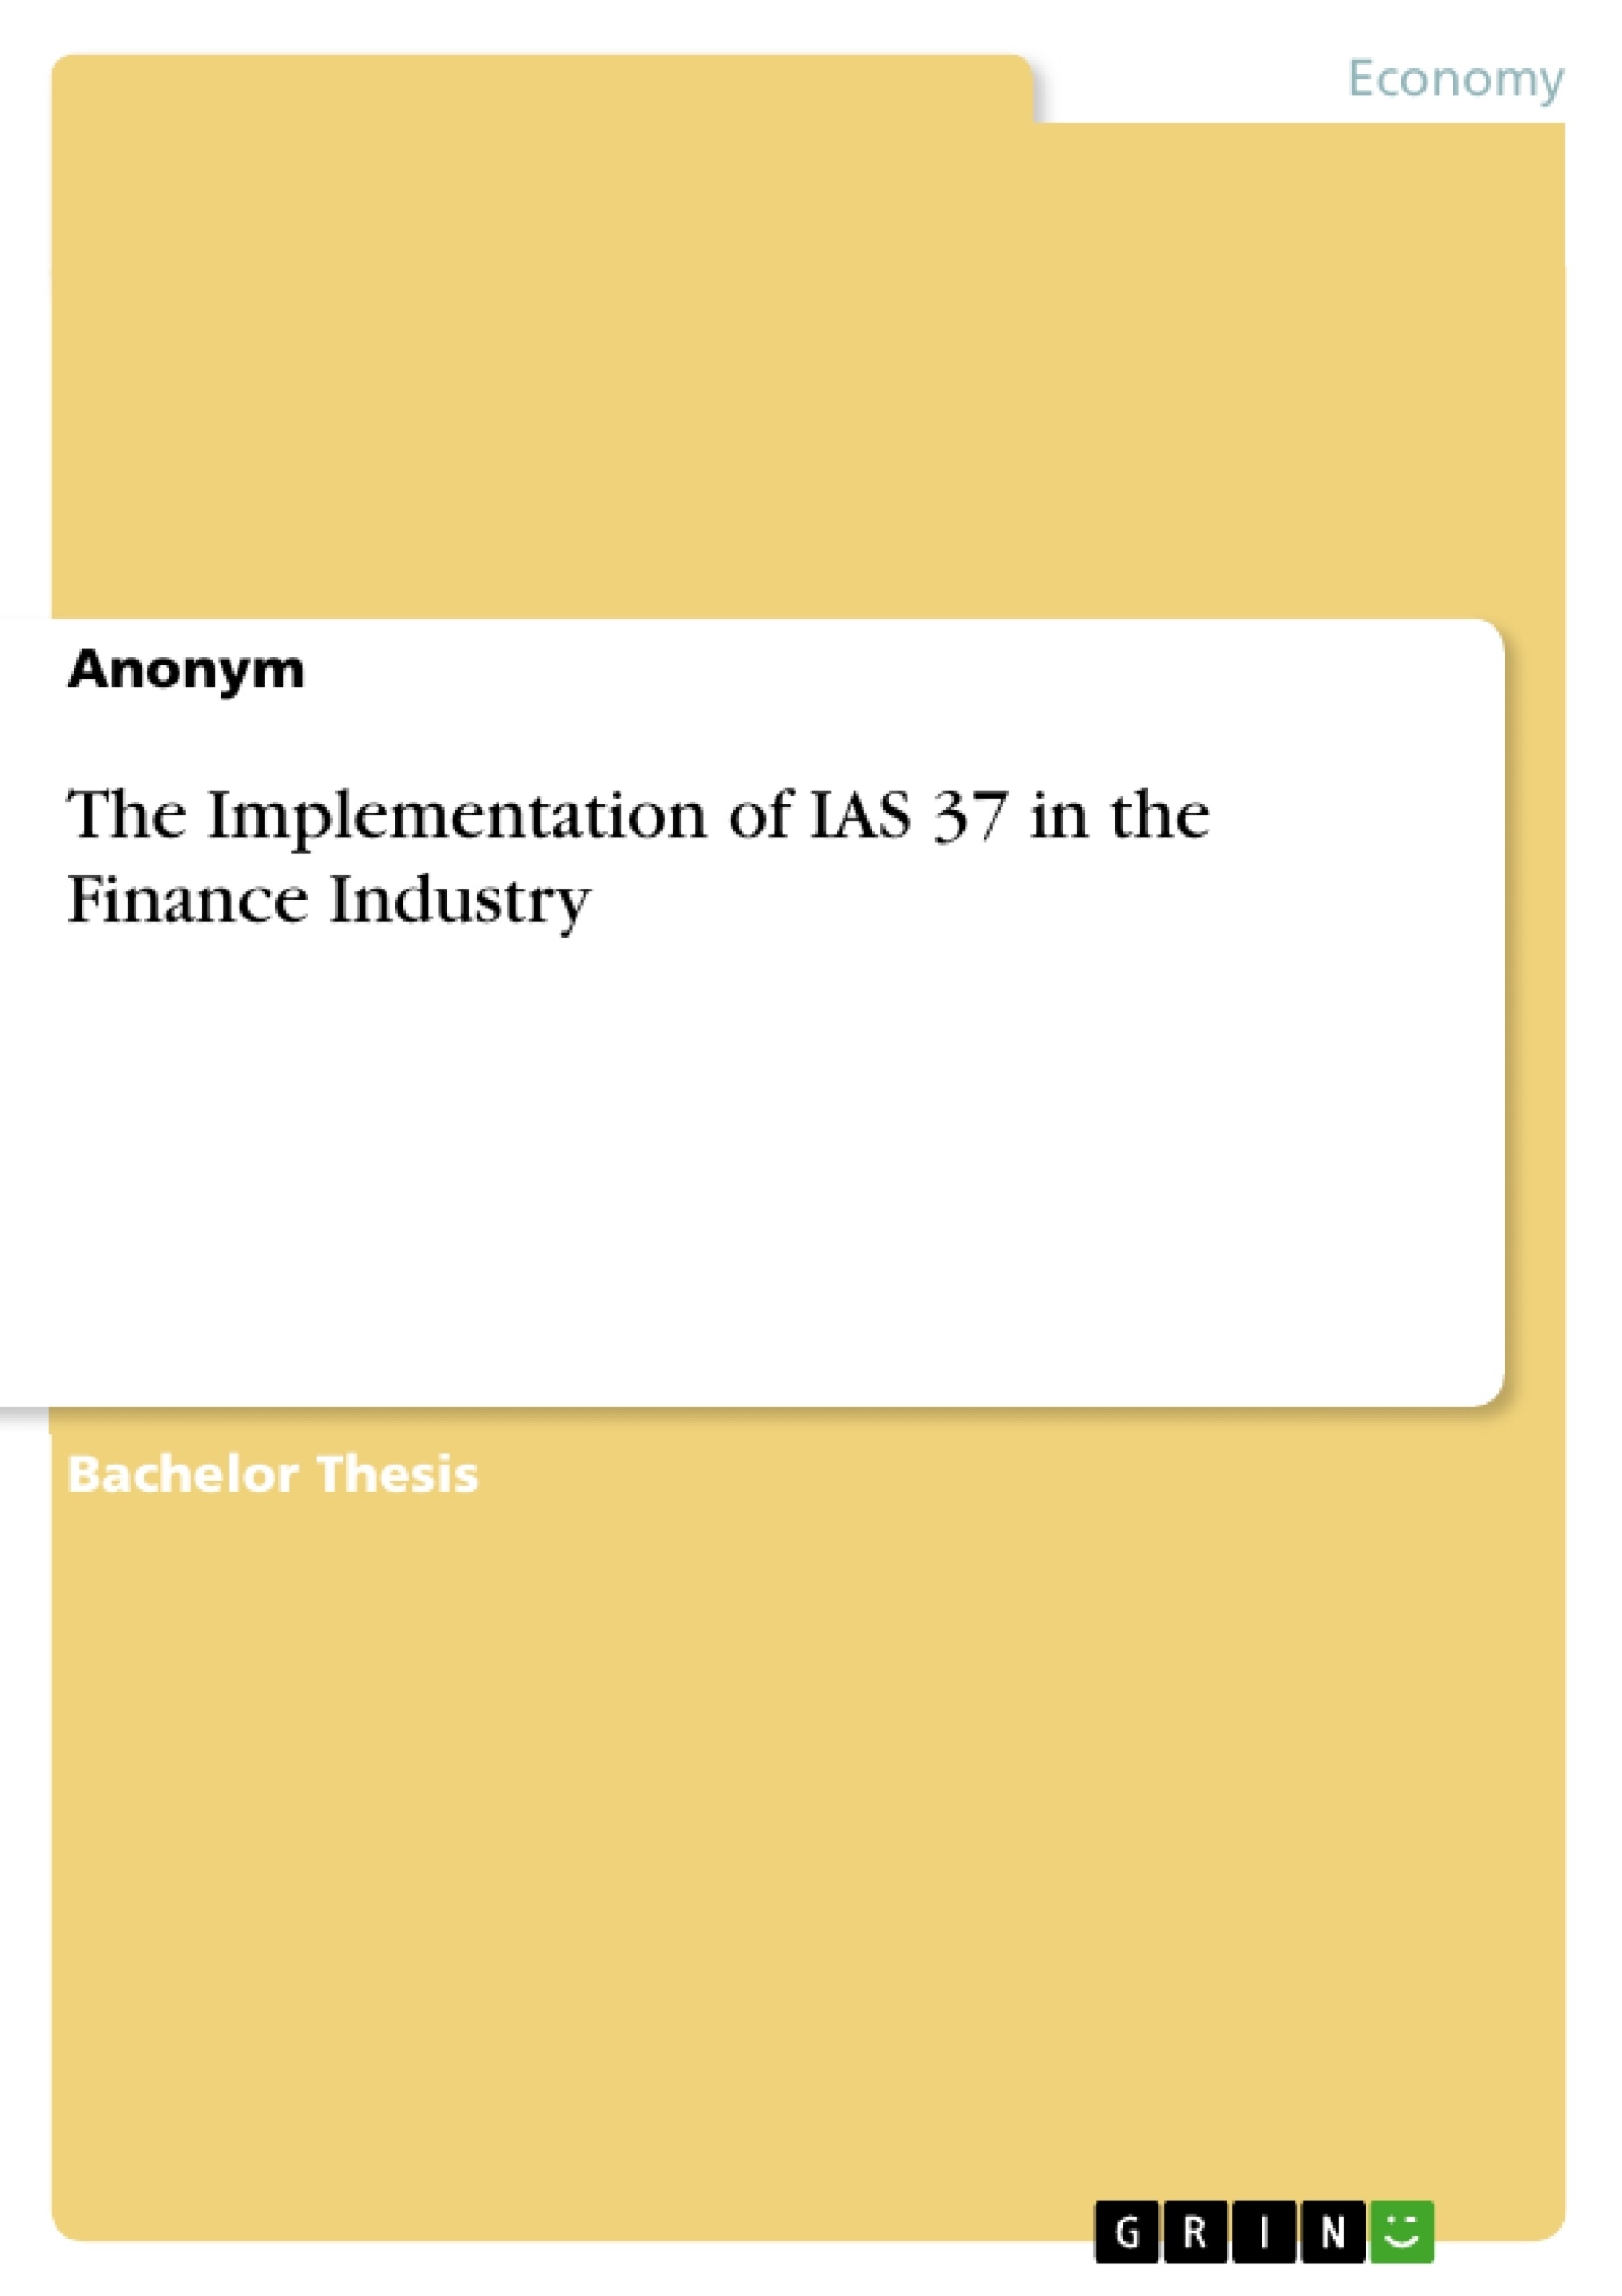 Title: The Implementation of IAS 37 in the Finance Industry